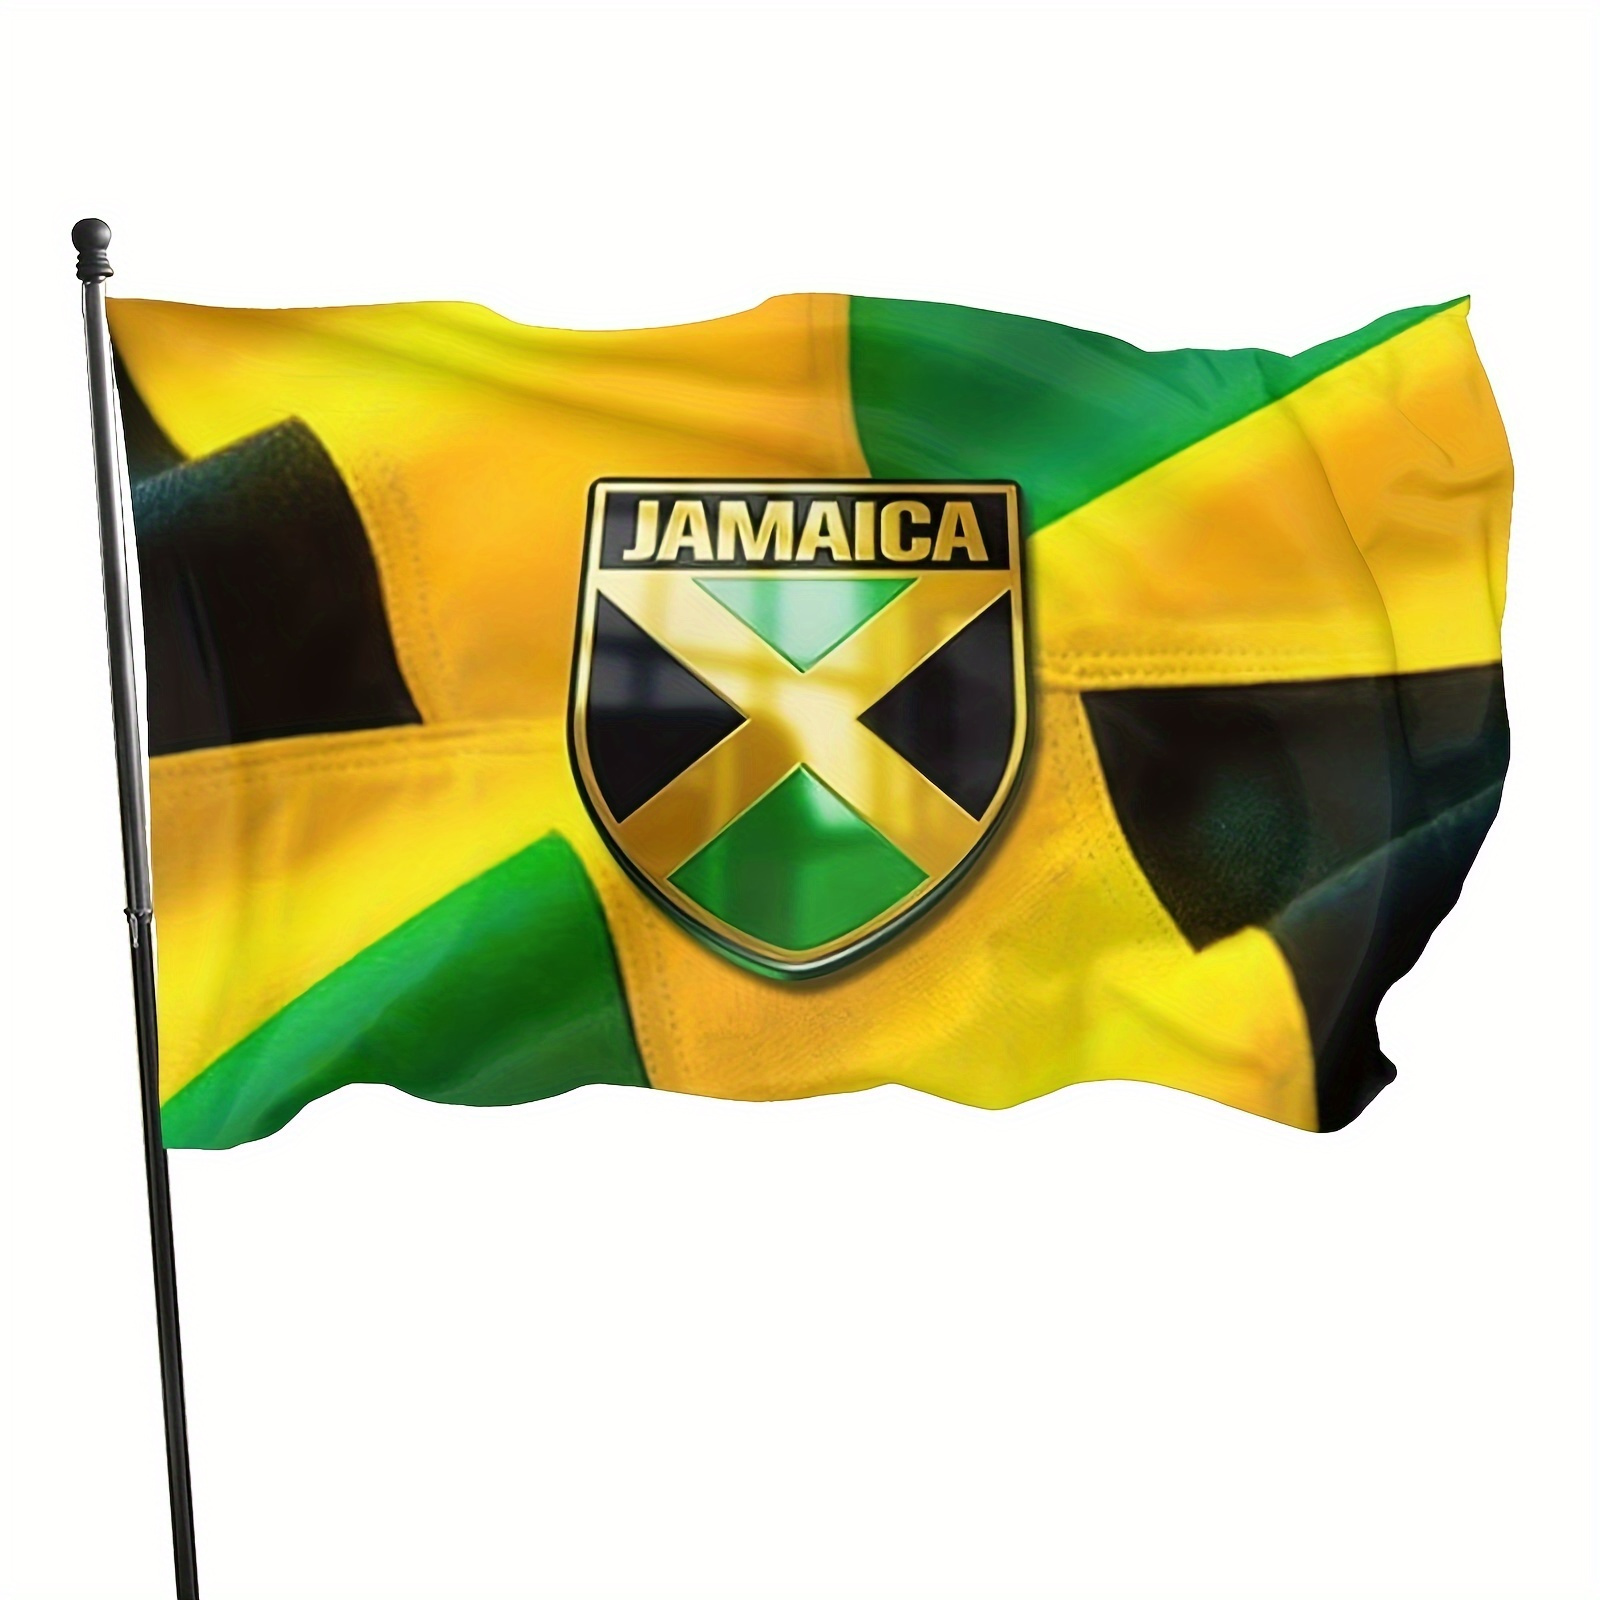 

Jamaica National Flag - Durable Polyester Outdoor Garden Flag, 3x5 Ft, Vibrant Colors, Fade-resistant, Perfect For Patriotic Decor